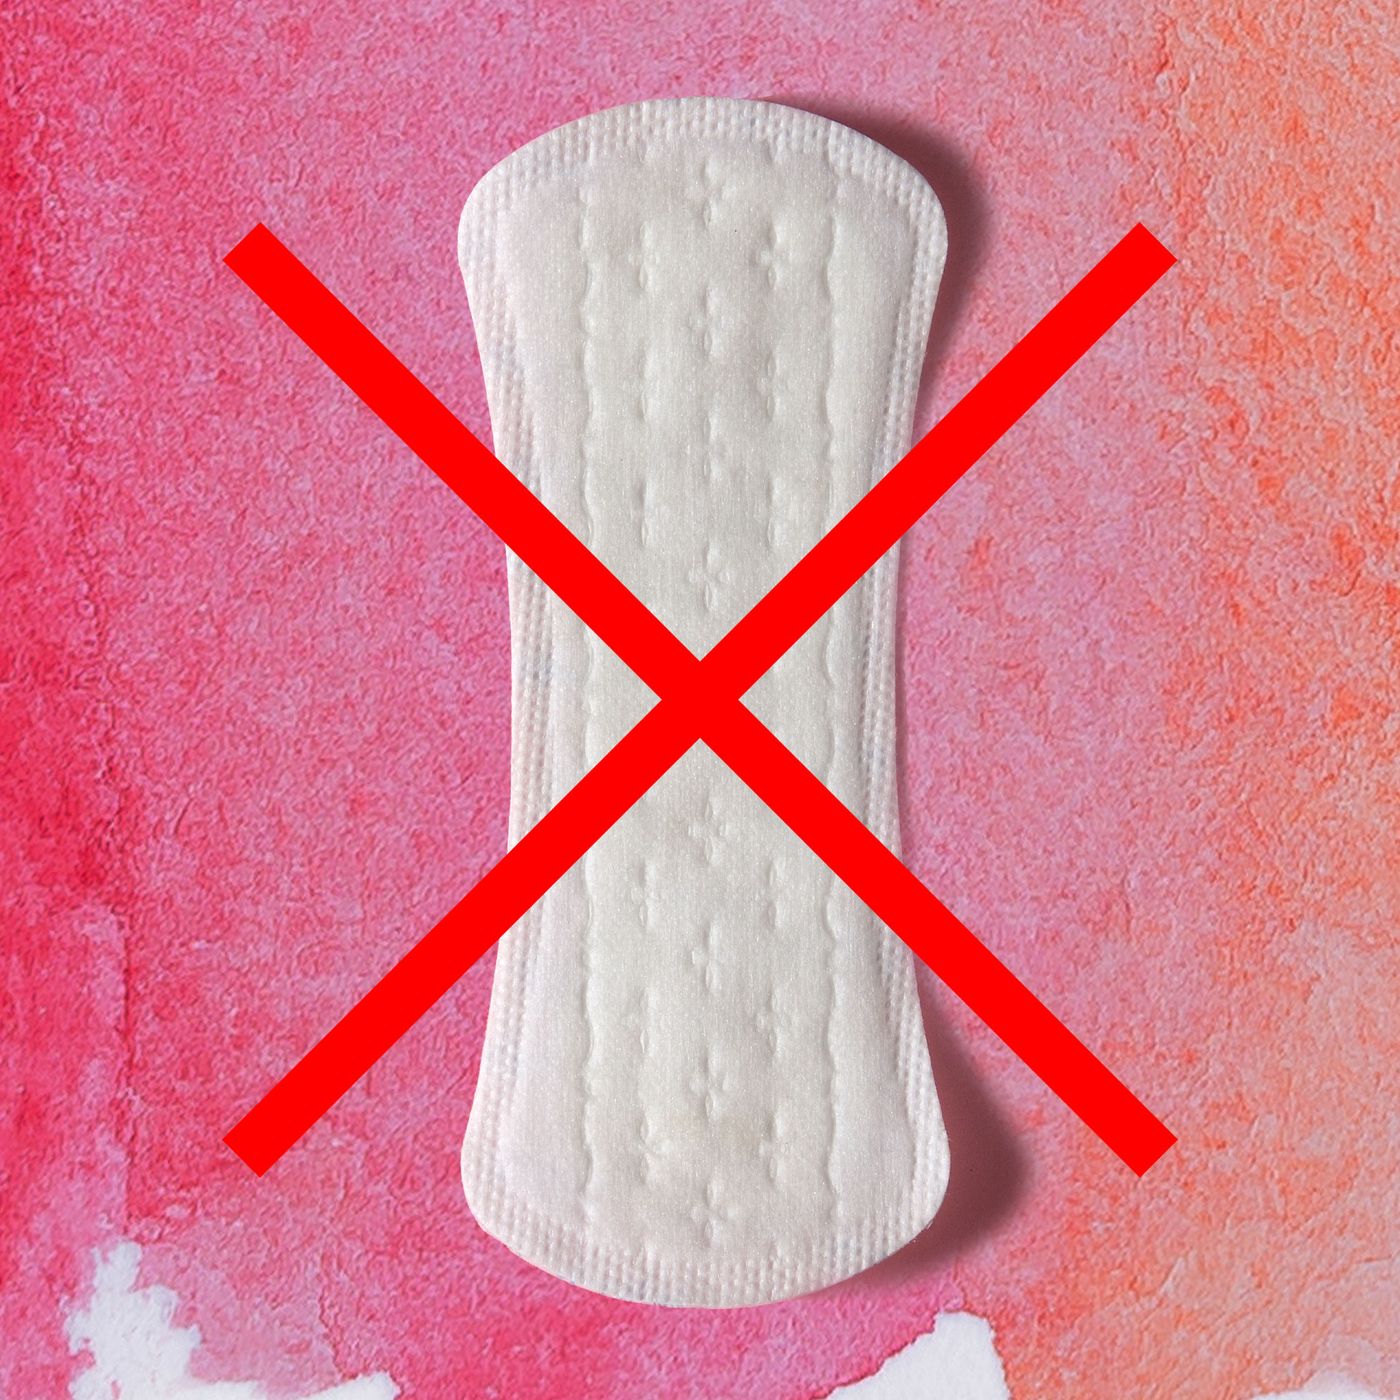 What Are 'Missed Period Pills,' and How Do They Work?